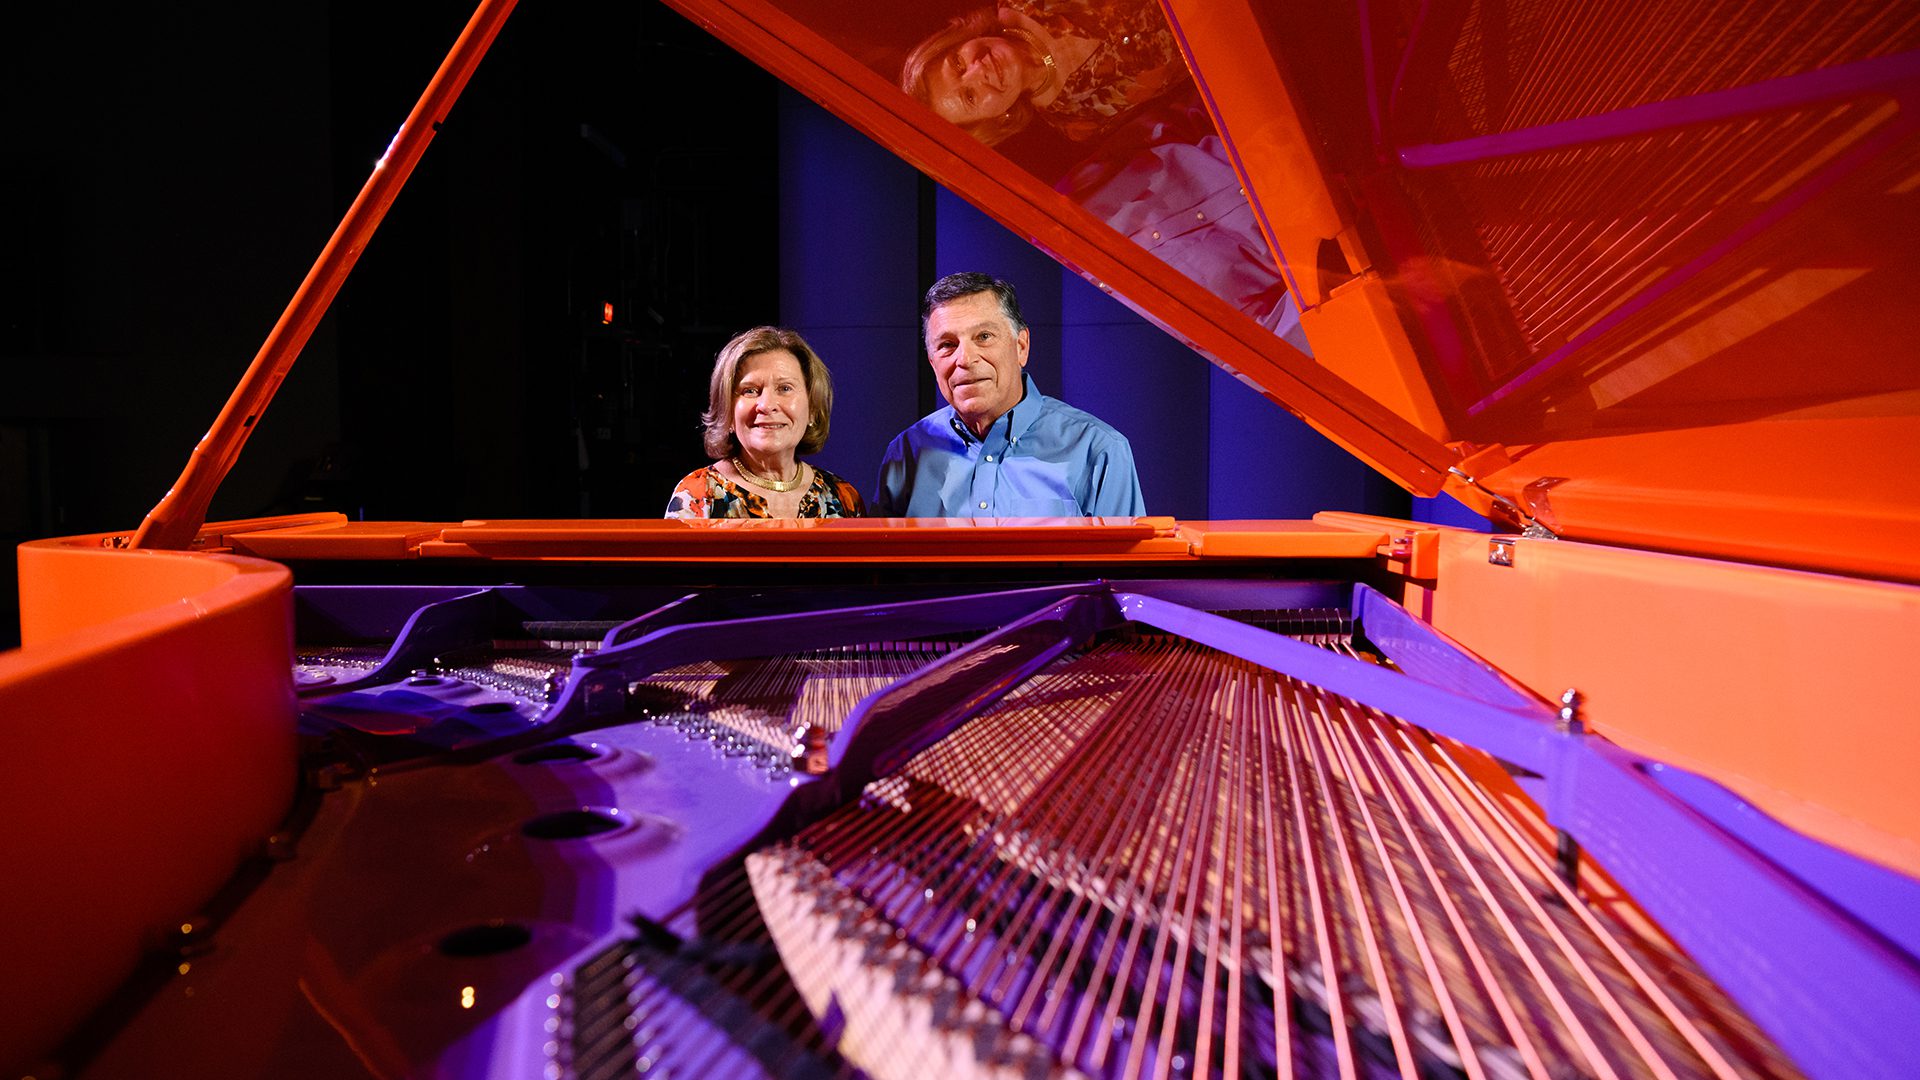 A distinguished couple--man and woman--smile while seated at an orange and purple piano. The interior of the piano is purple, and the exterior is orange. The photo looks under the lid of the piano to show the strings in the foreground.